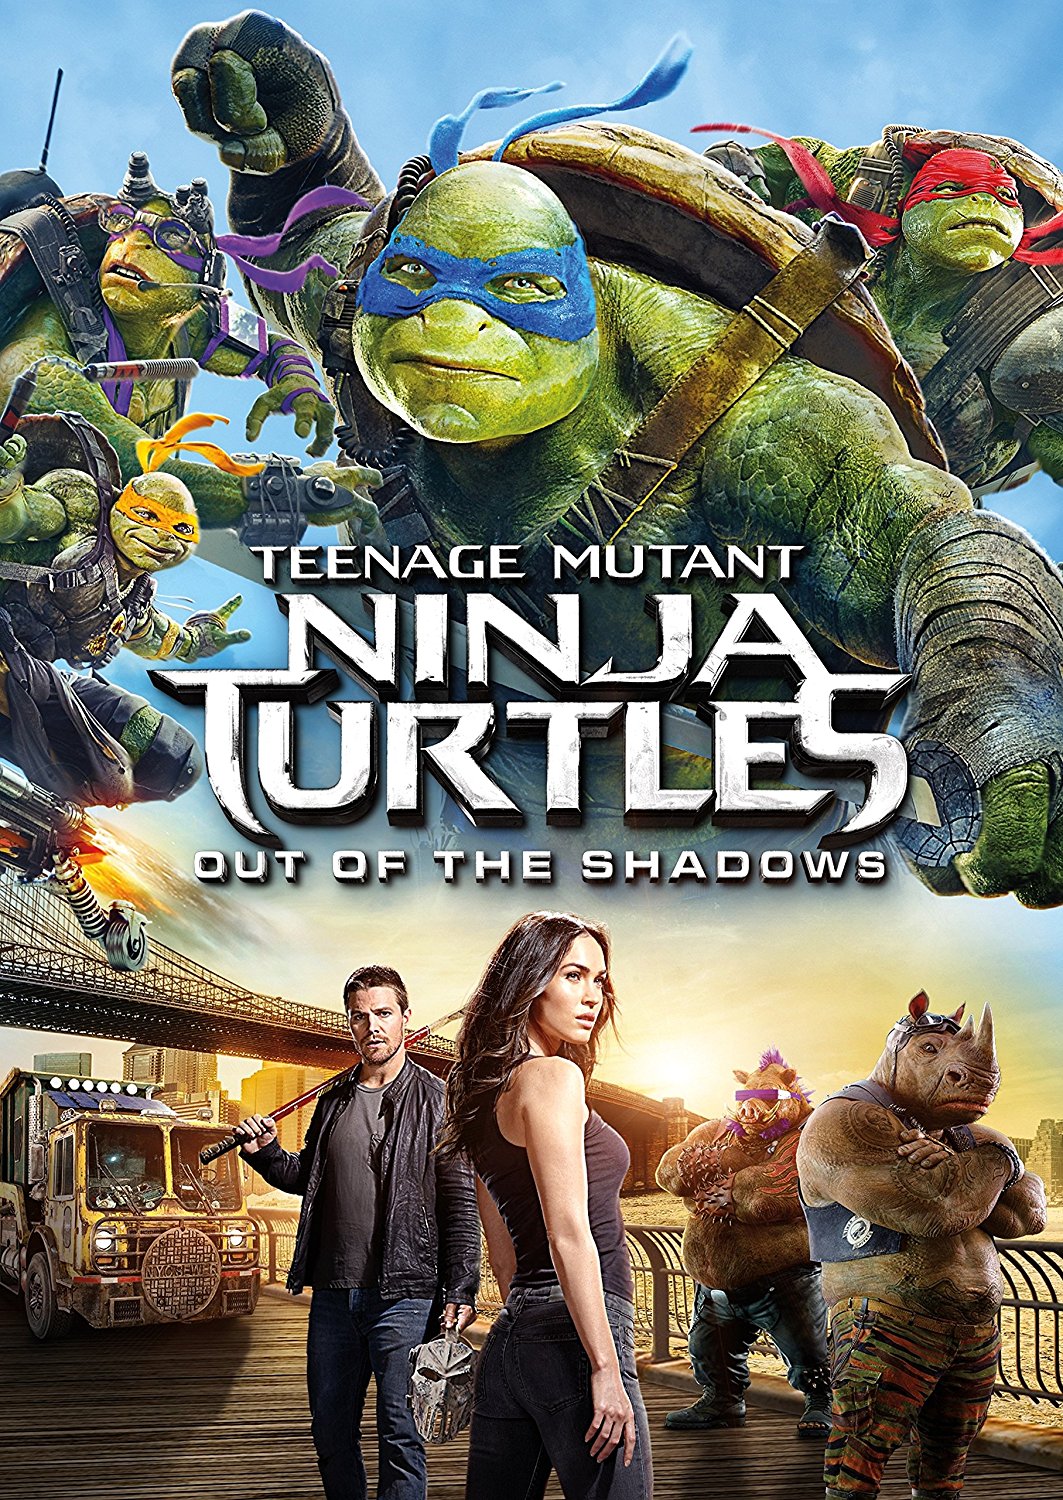 Rent Teenage Mutant Ninja Turtles: Out Of The Shadows on Amazon Instant Video – Just $.99!